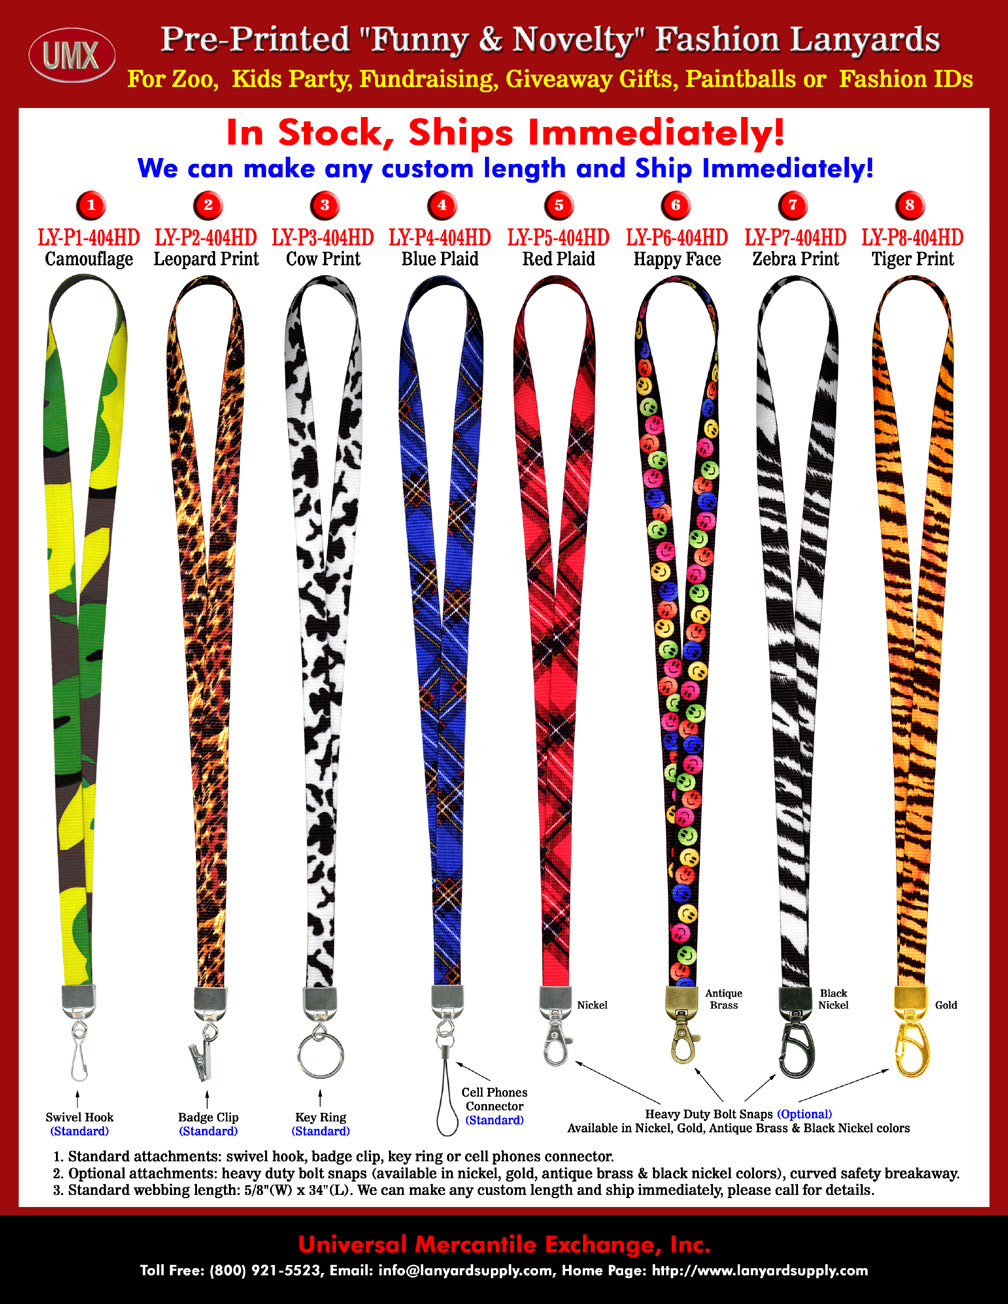 Animal print lanyards come with a variety of eye catching pre-printed wild world jungle themes or safari color patterns, such as leopard print, camouflage theme, zebra prints, tiger prints, cow prints and more. 